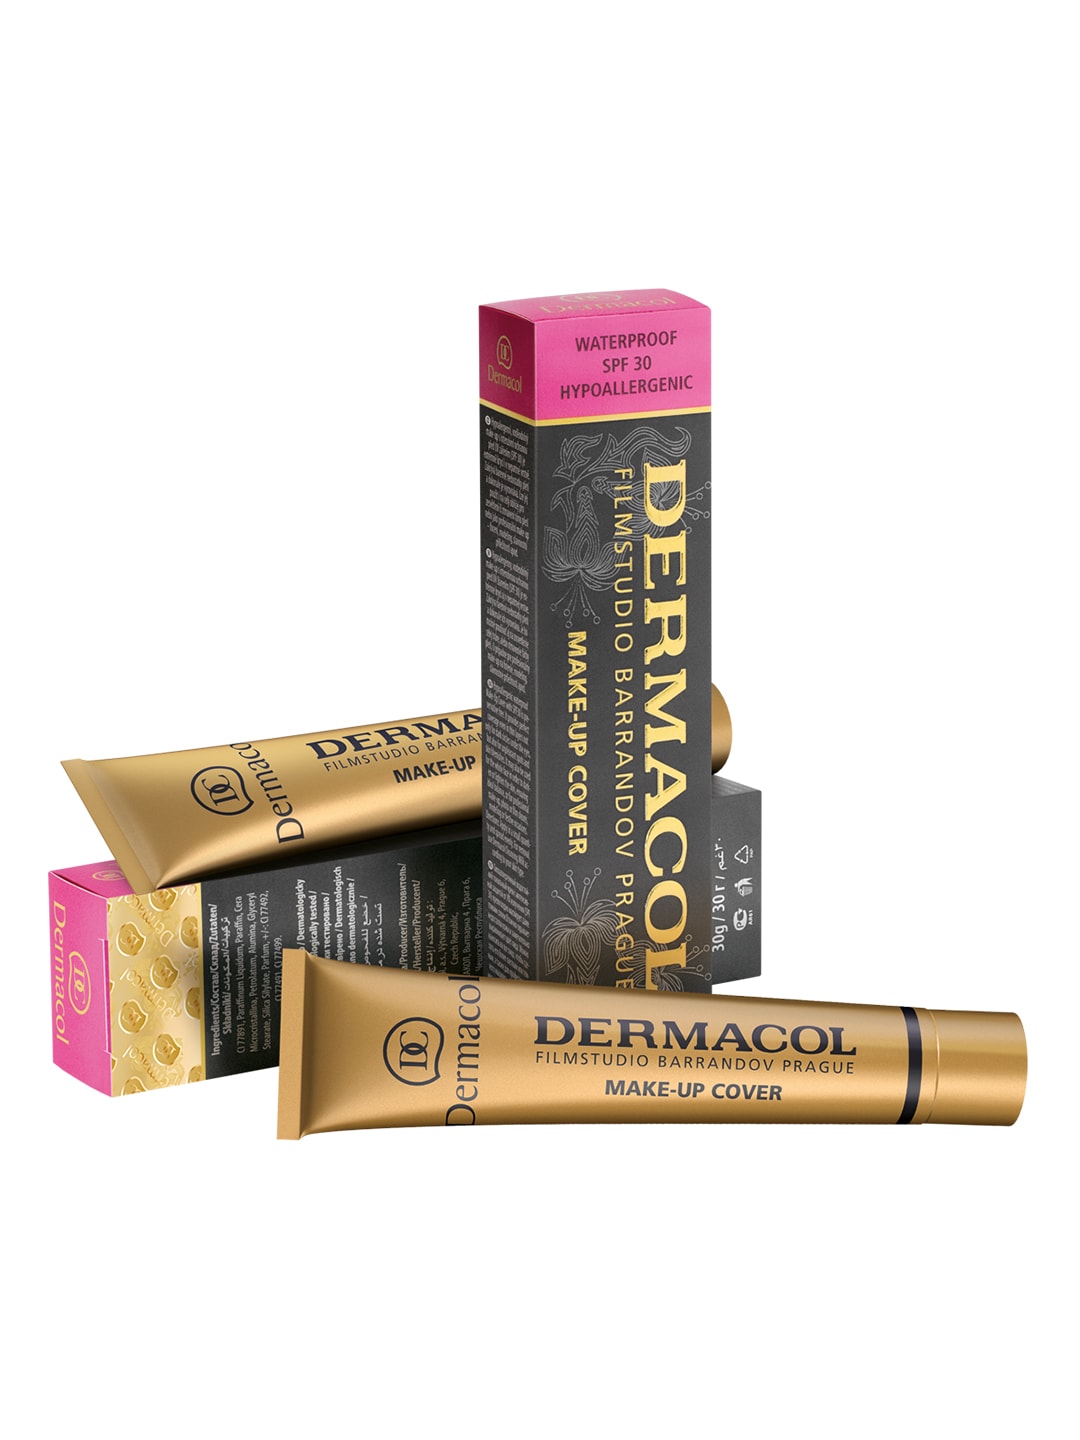 Dermacol Makeup Cover Shade 213 Price in India